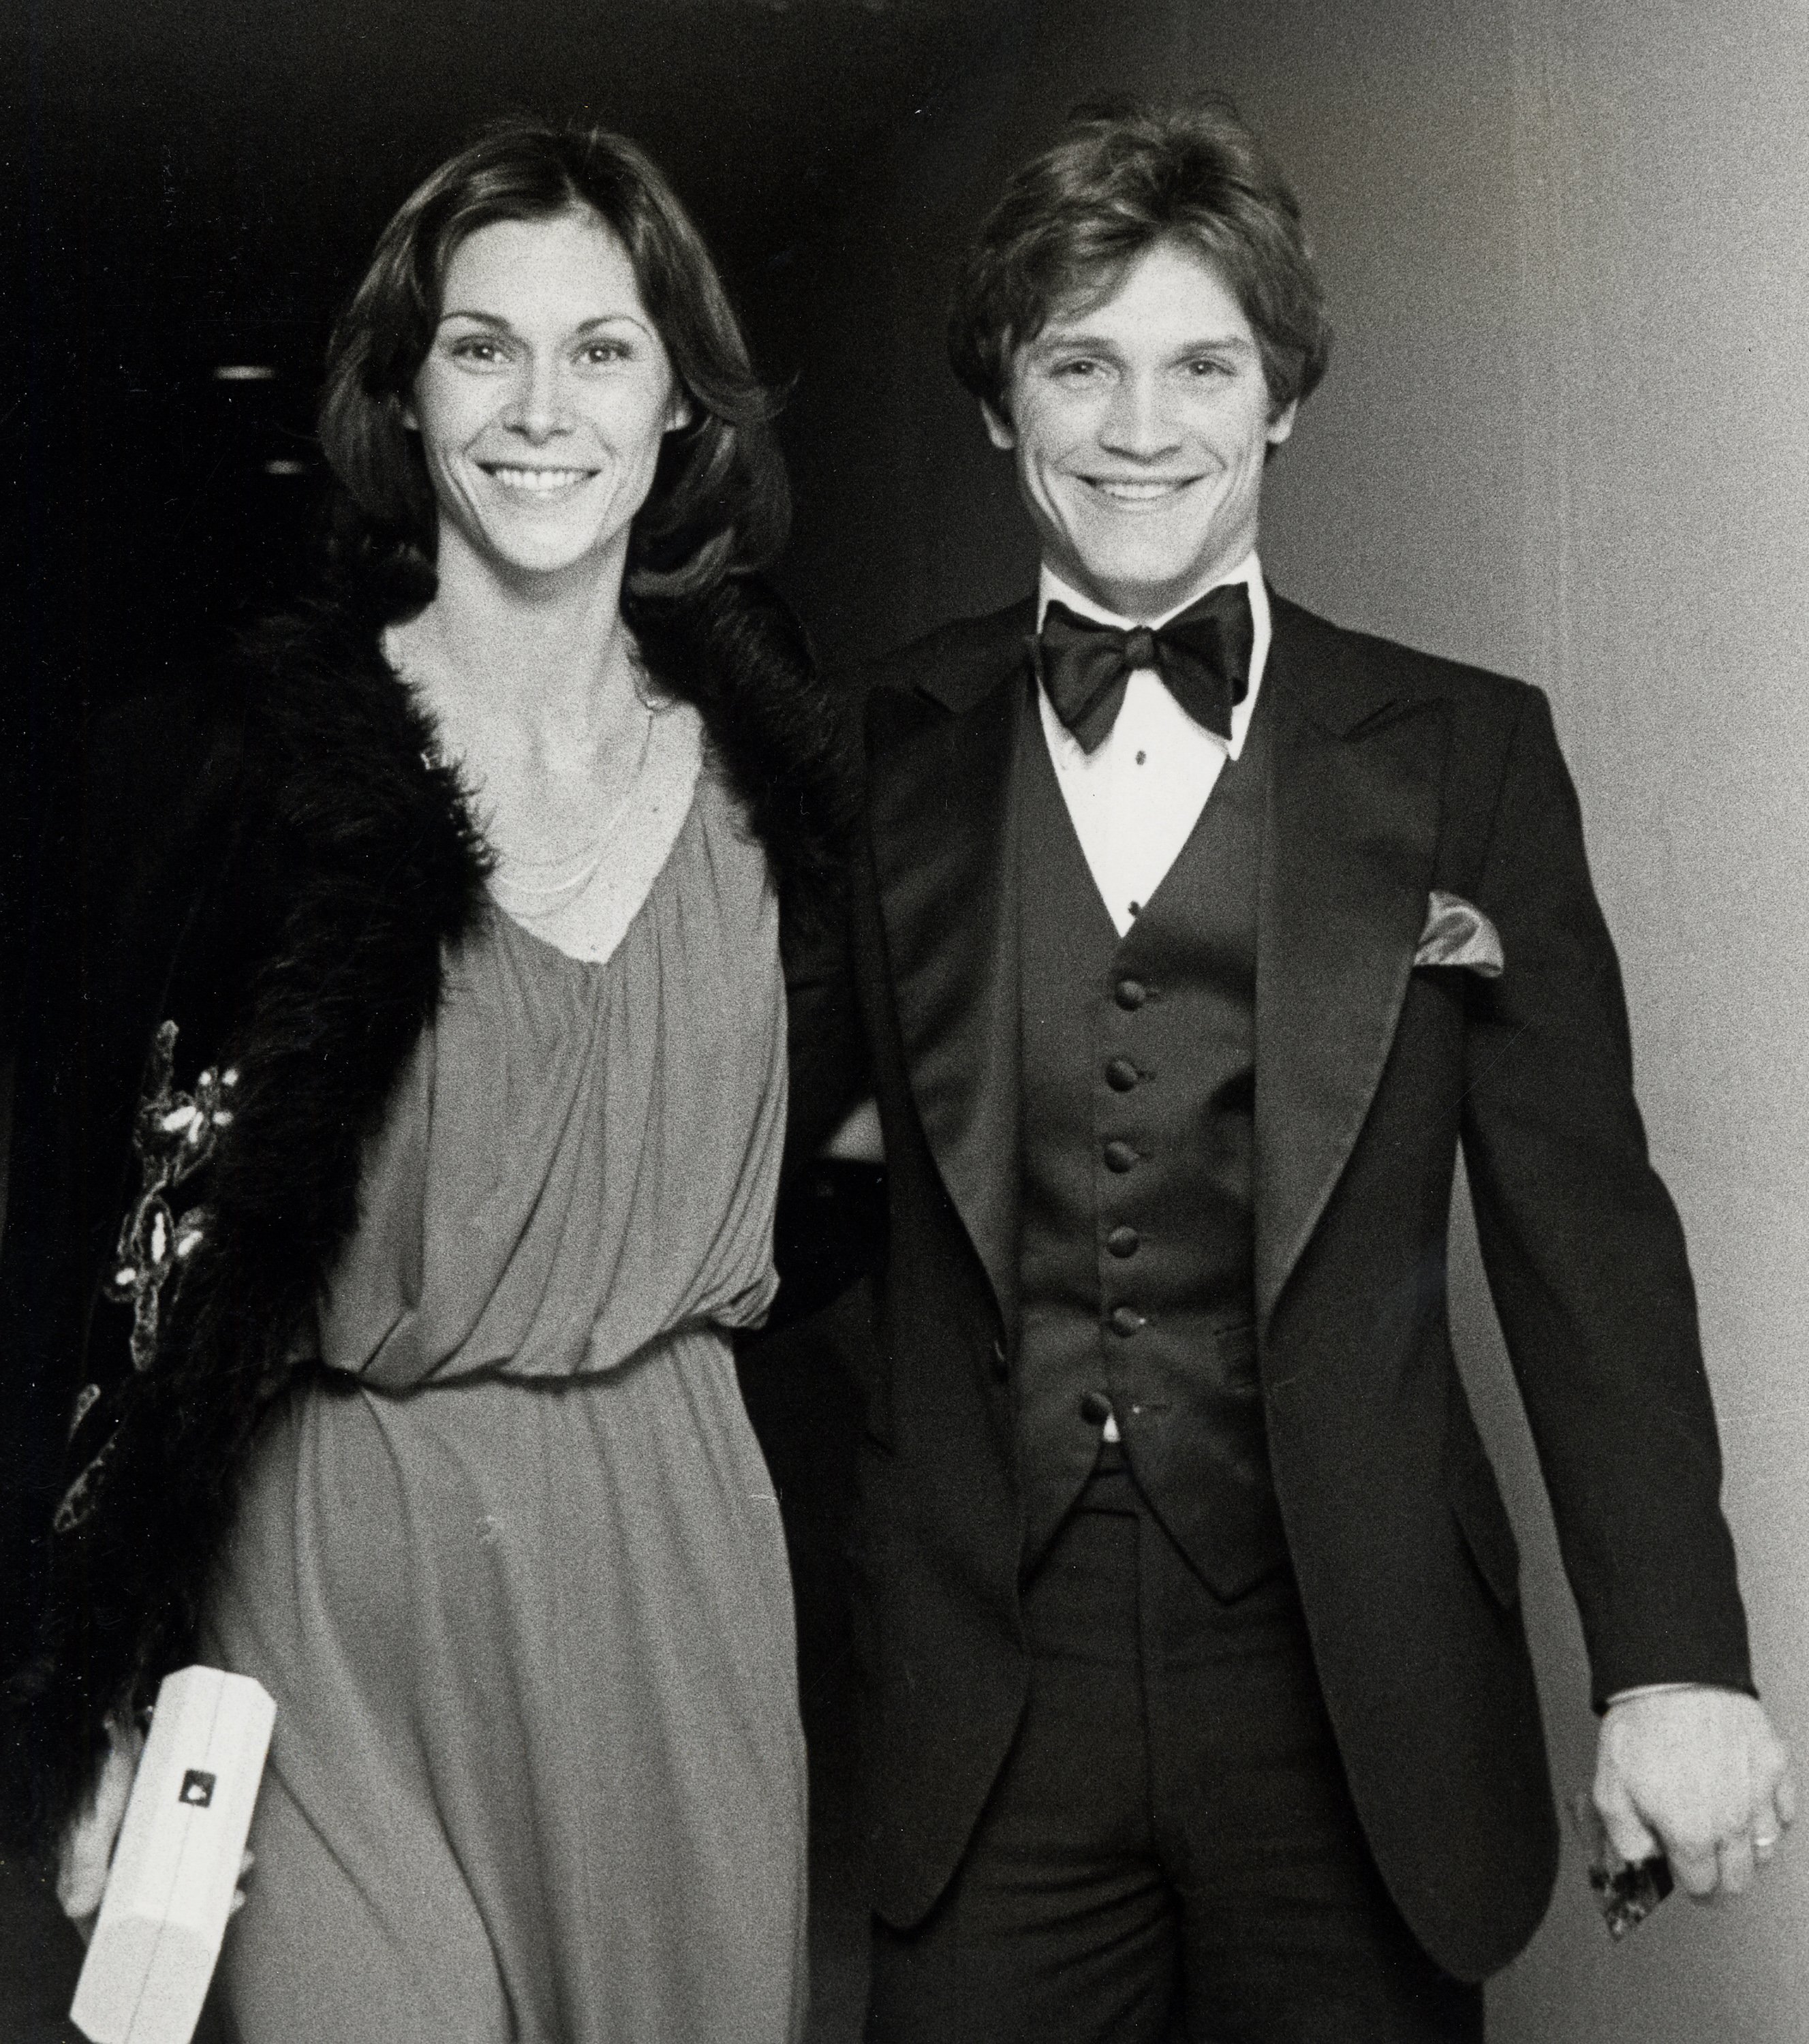 Actress Kate Jackson and actor Andrew Stevens during the 36th Annual Golden Globe Awards. / Source: Getty Images